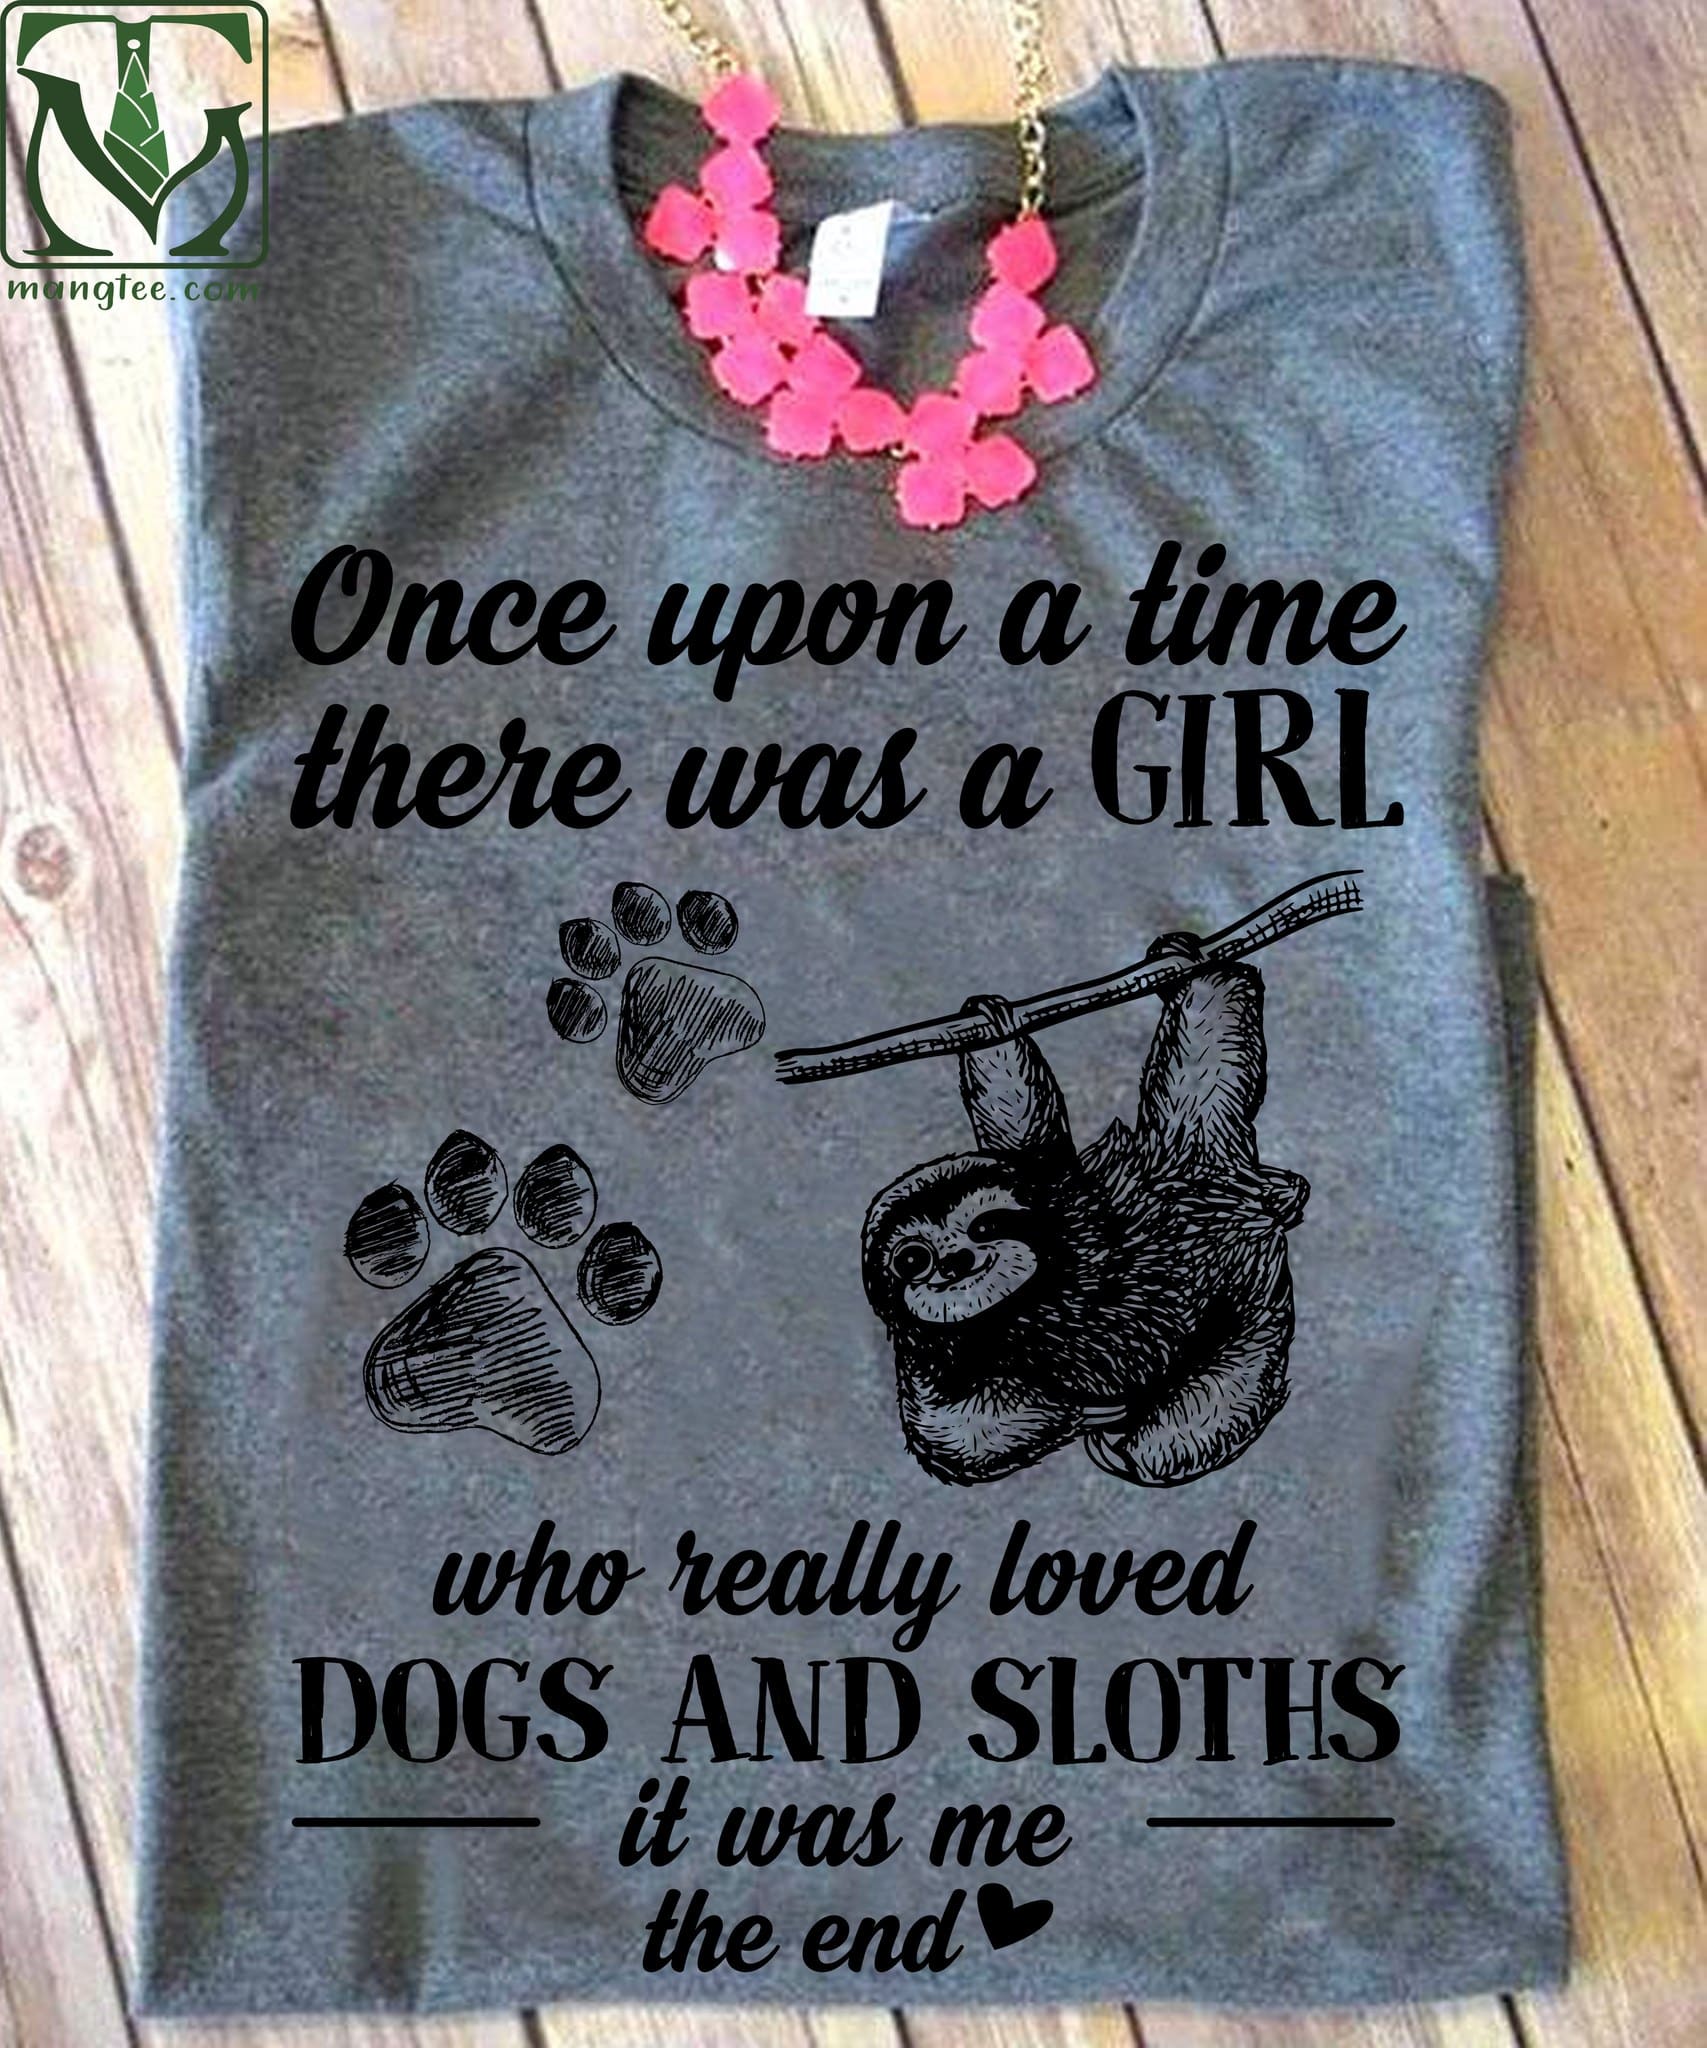 Dog Sloth Footprint - Once upon a time there was a girl who really loved dogs and sloths it was me the end